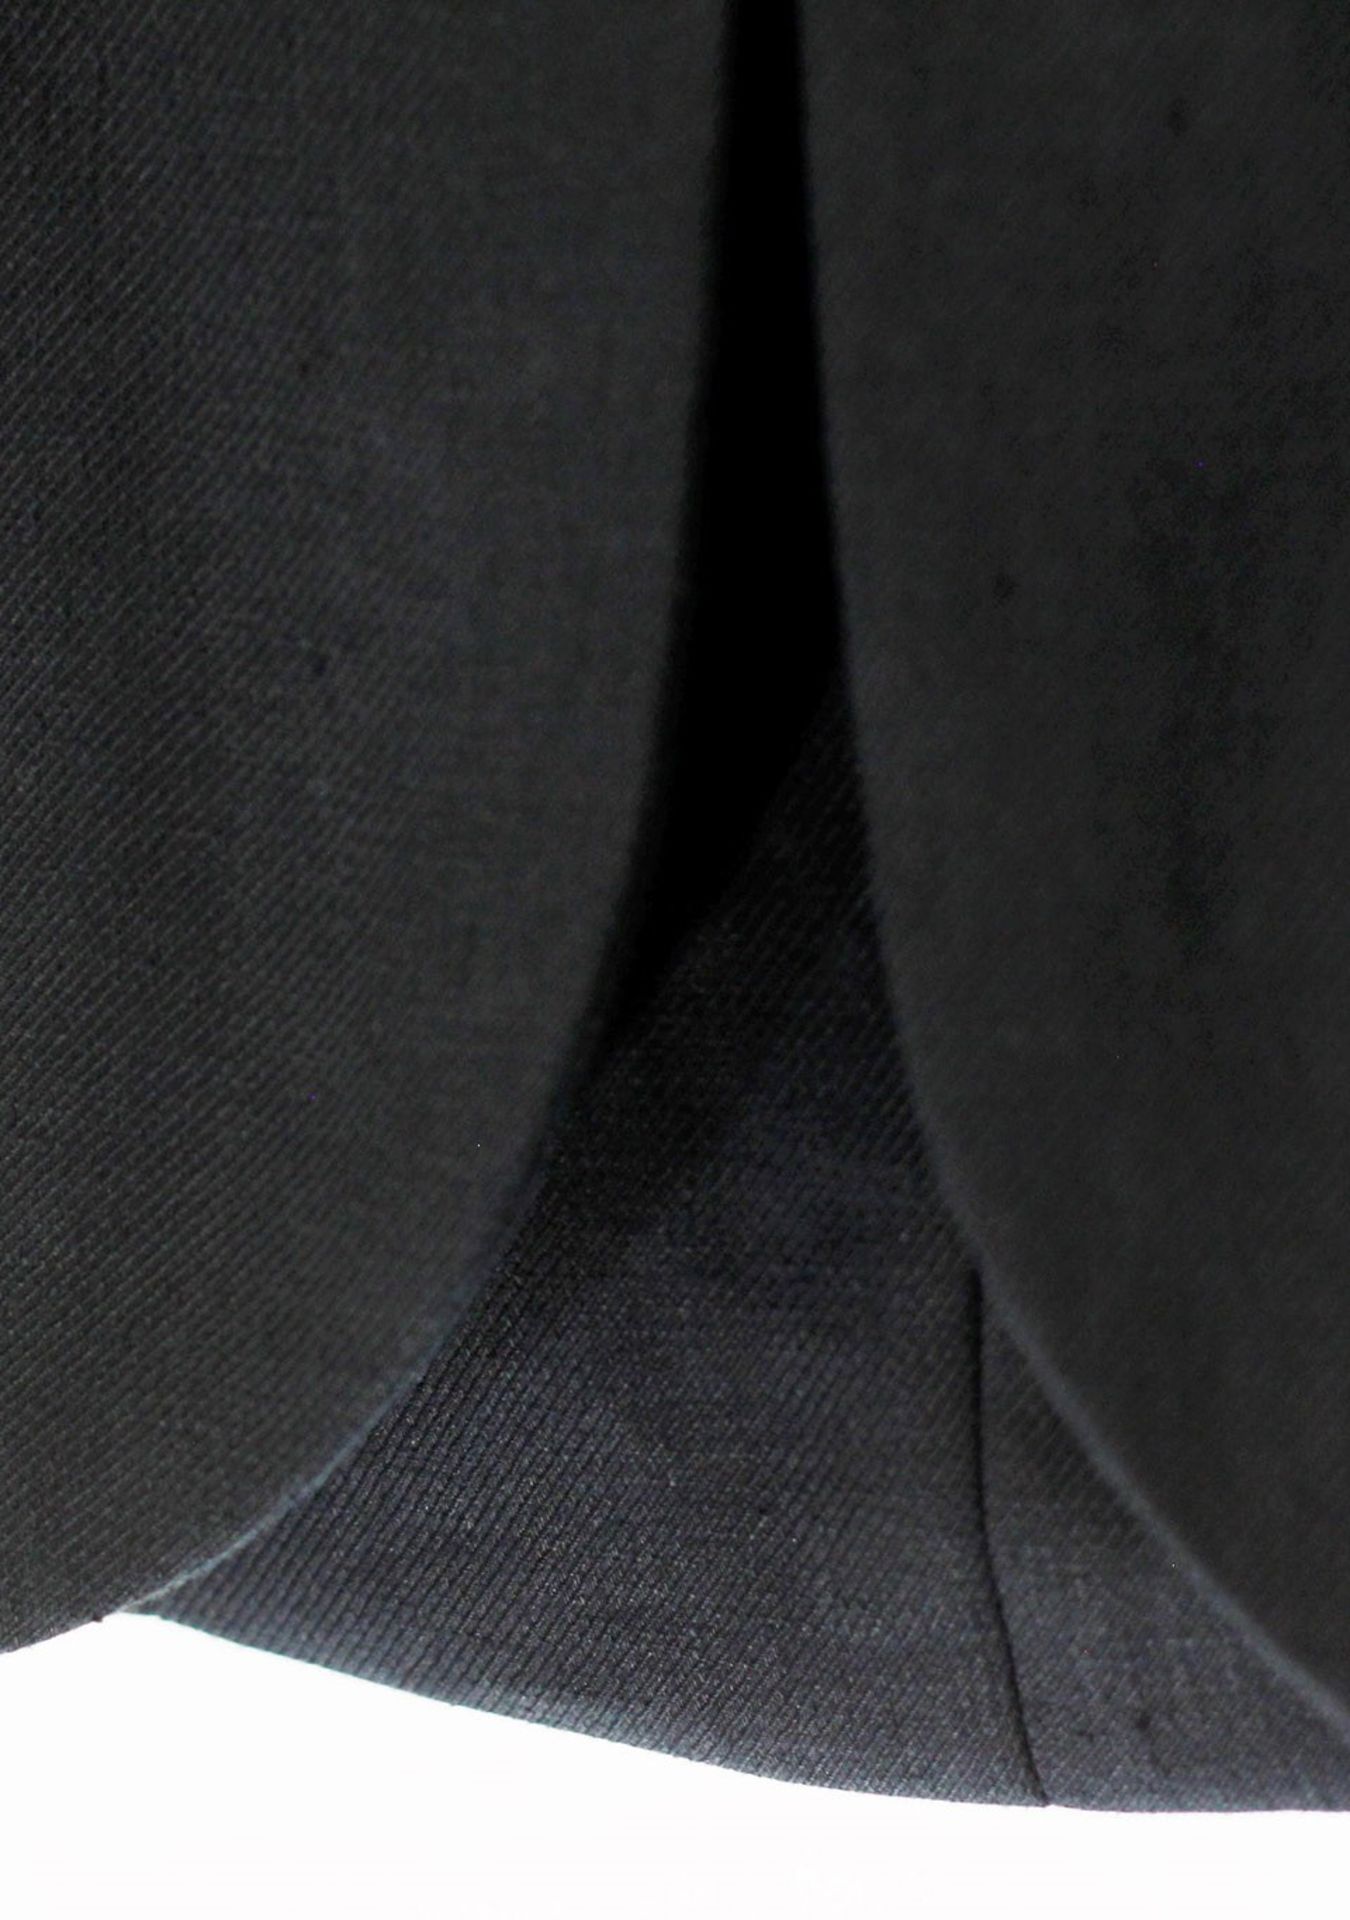 1 x Natan Black Bolero - Size: 10 - Material: 100% Linen - From a High End Clothing Boutique In - Image 9 of 10